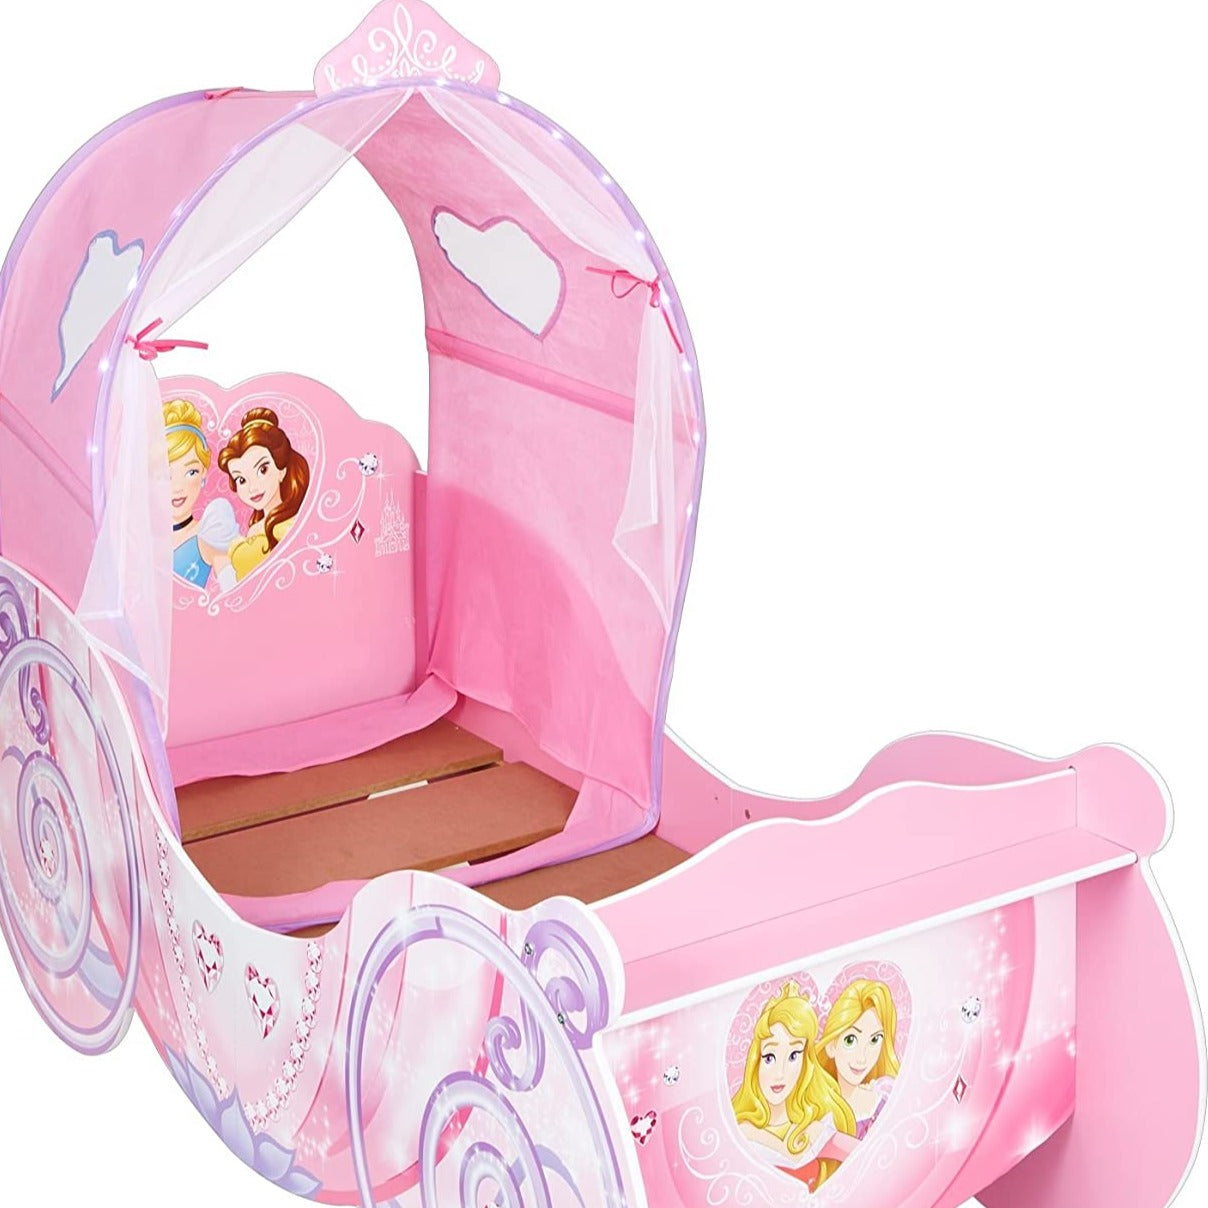 carriage beds for toddlers